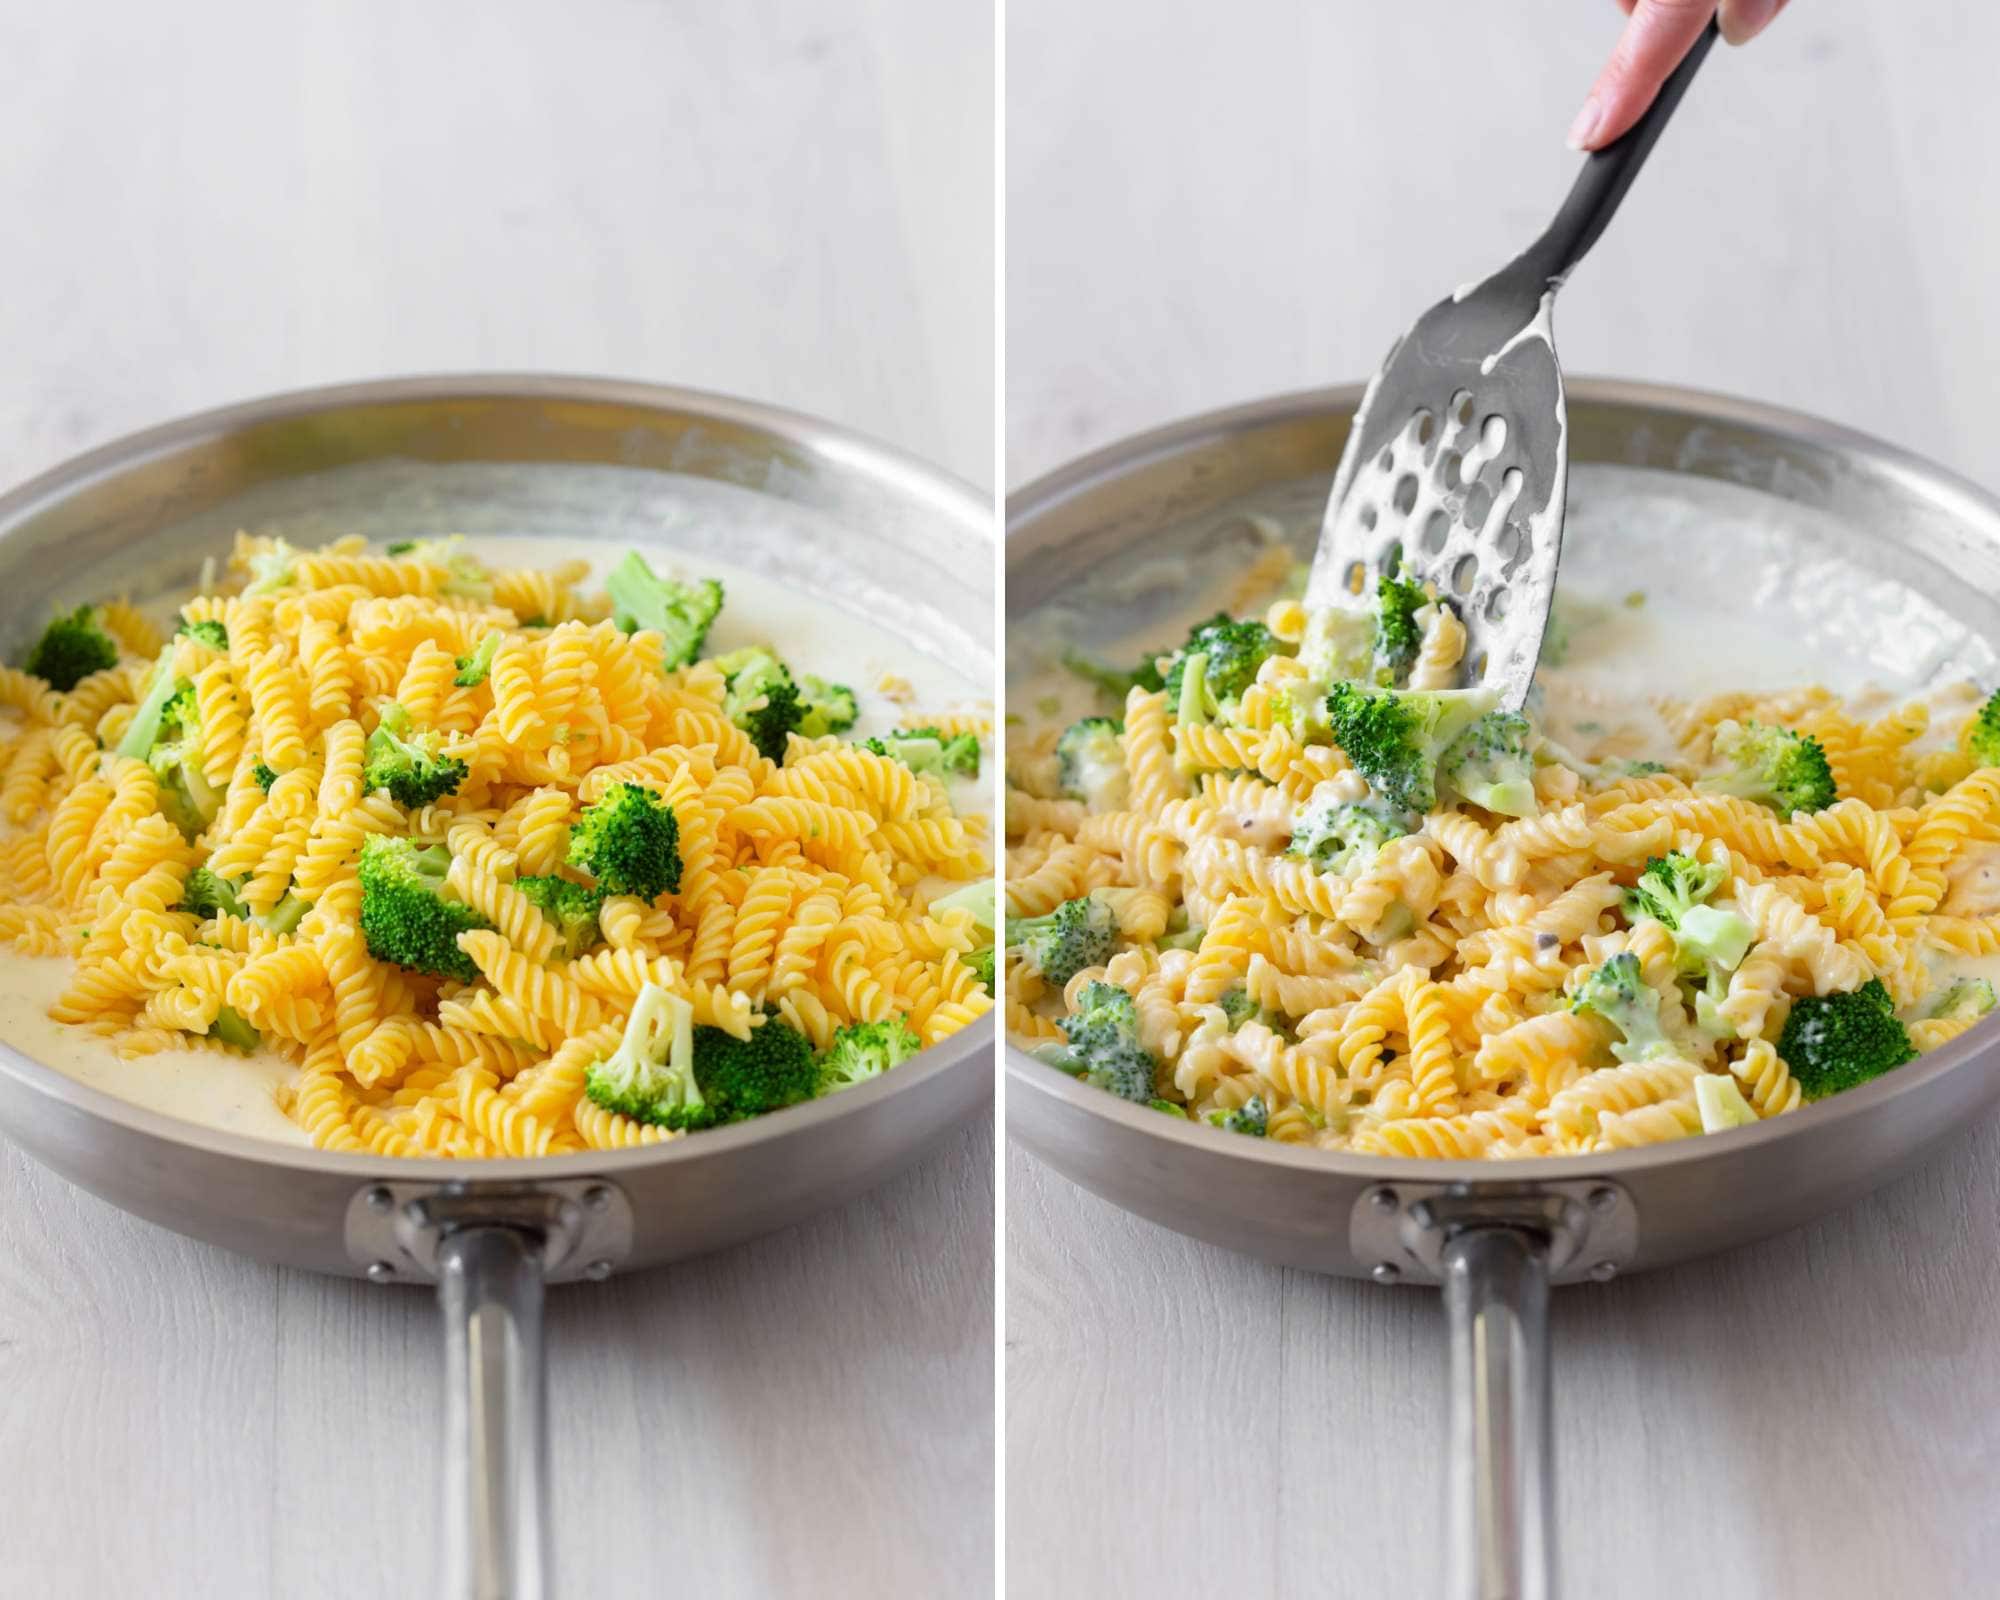 Mixing cooked pasta and broccoli through white sauce.